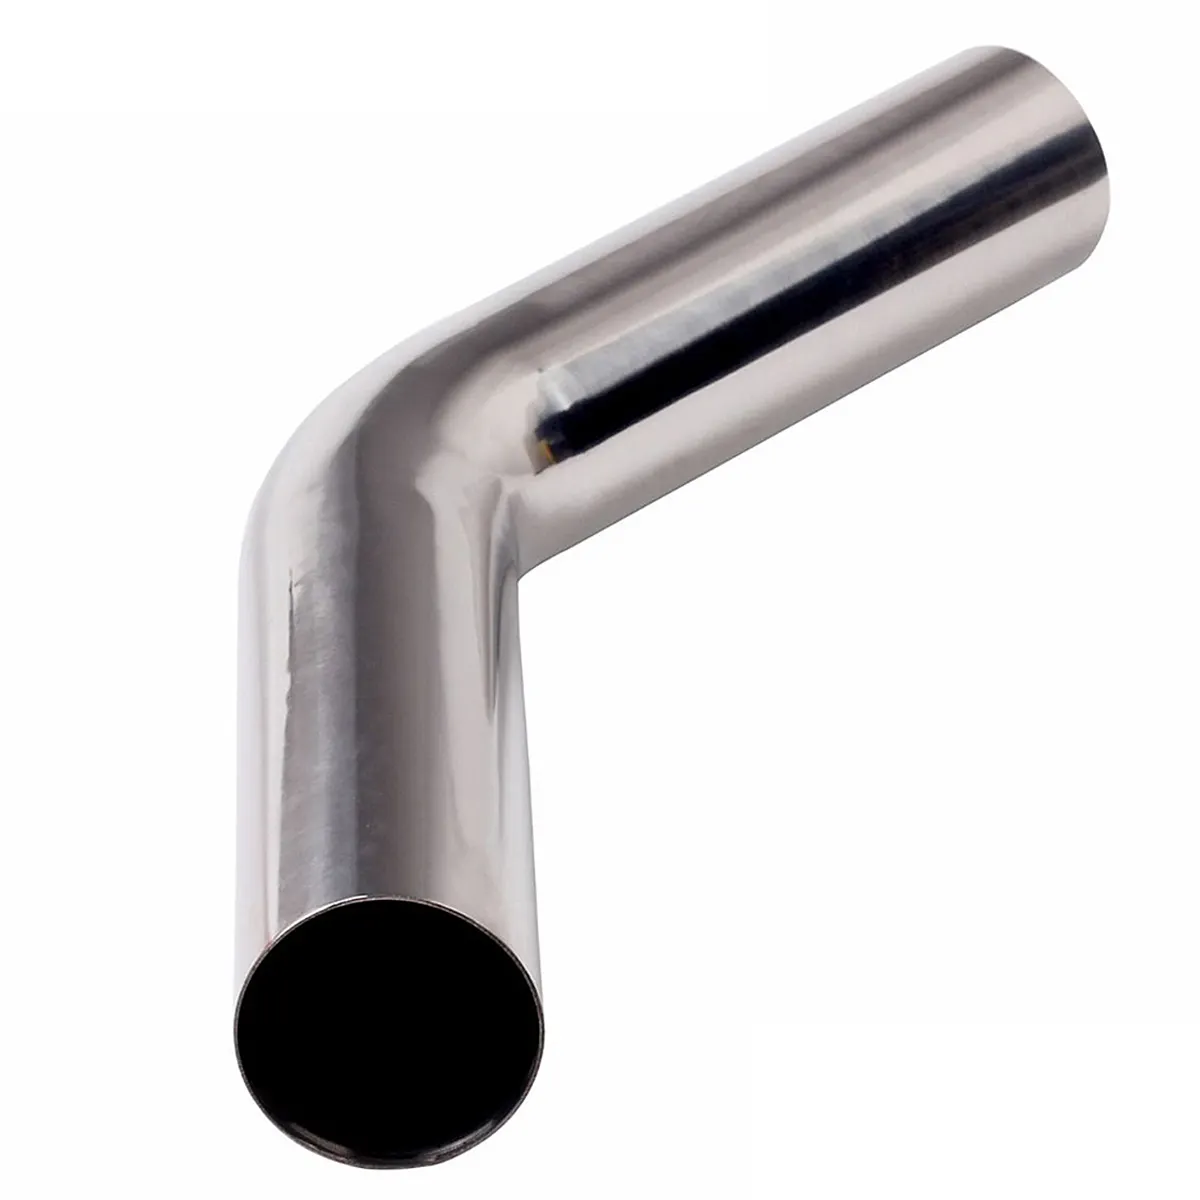 3" Inch 45 Degree 90 Degree Bend T-304 Stainless Steel Exhaust Tube Pipe